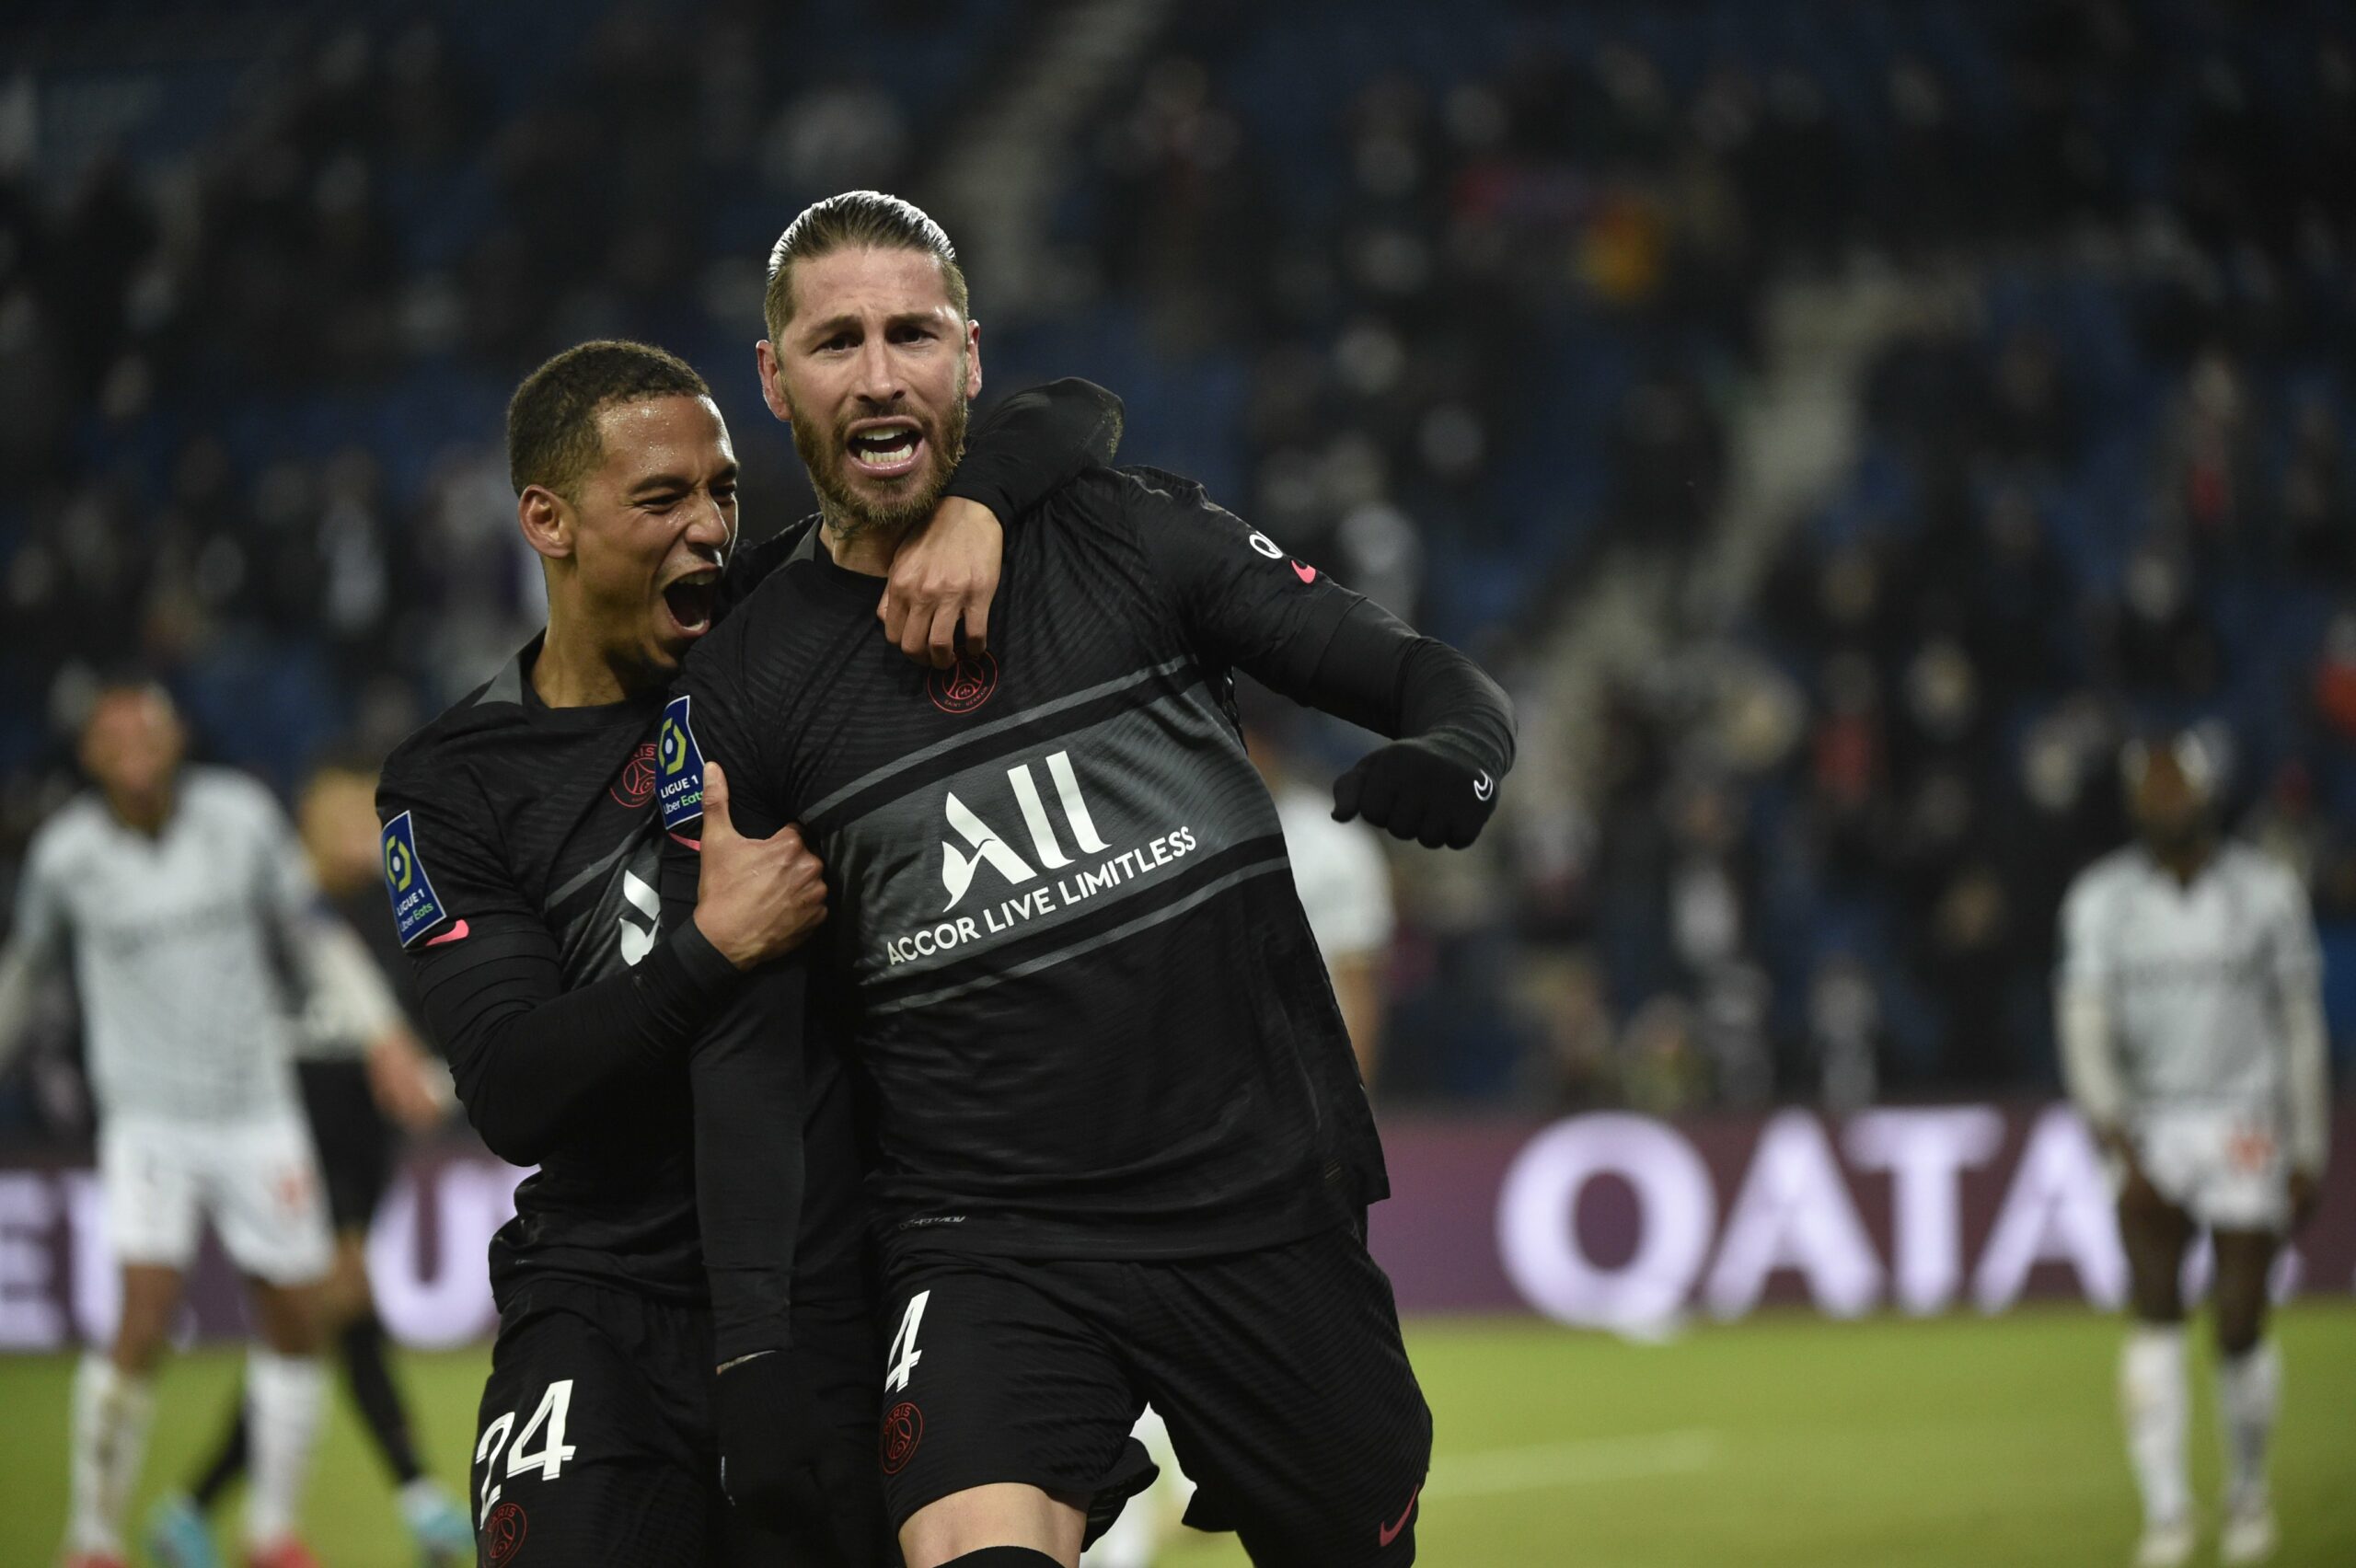 Sergio Ramos first goal scored for psg